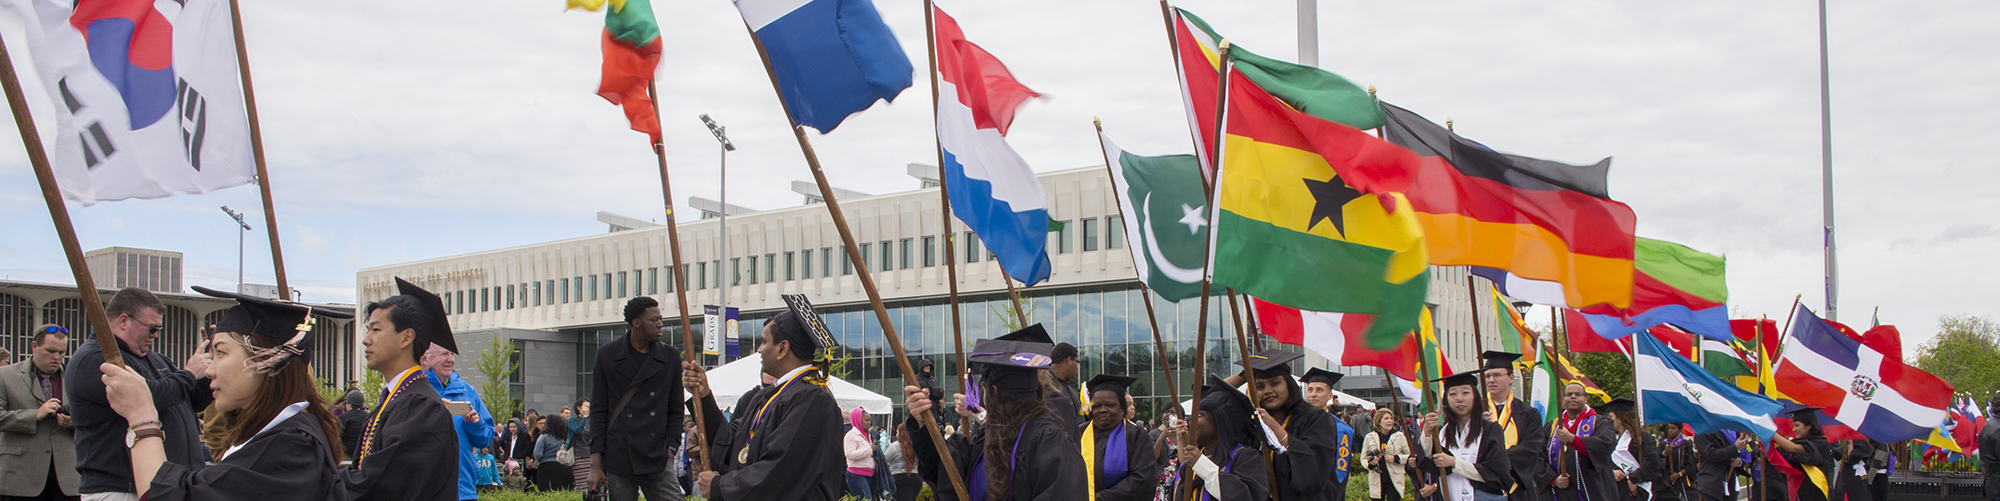 Students holding flags from their countries at commencement.